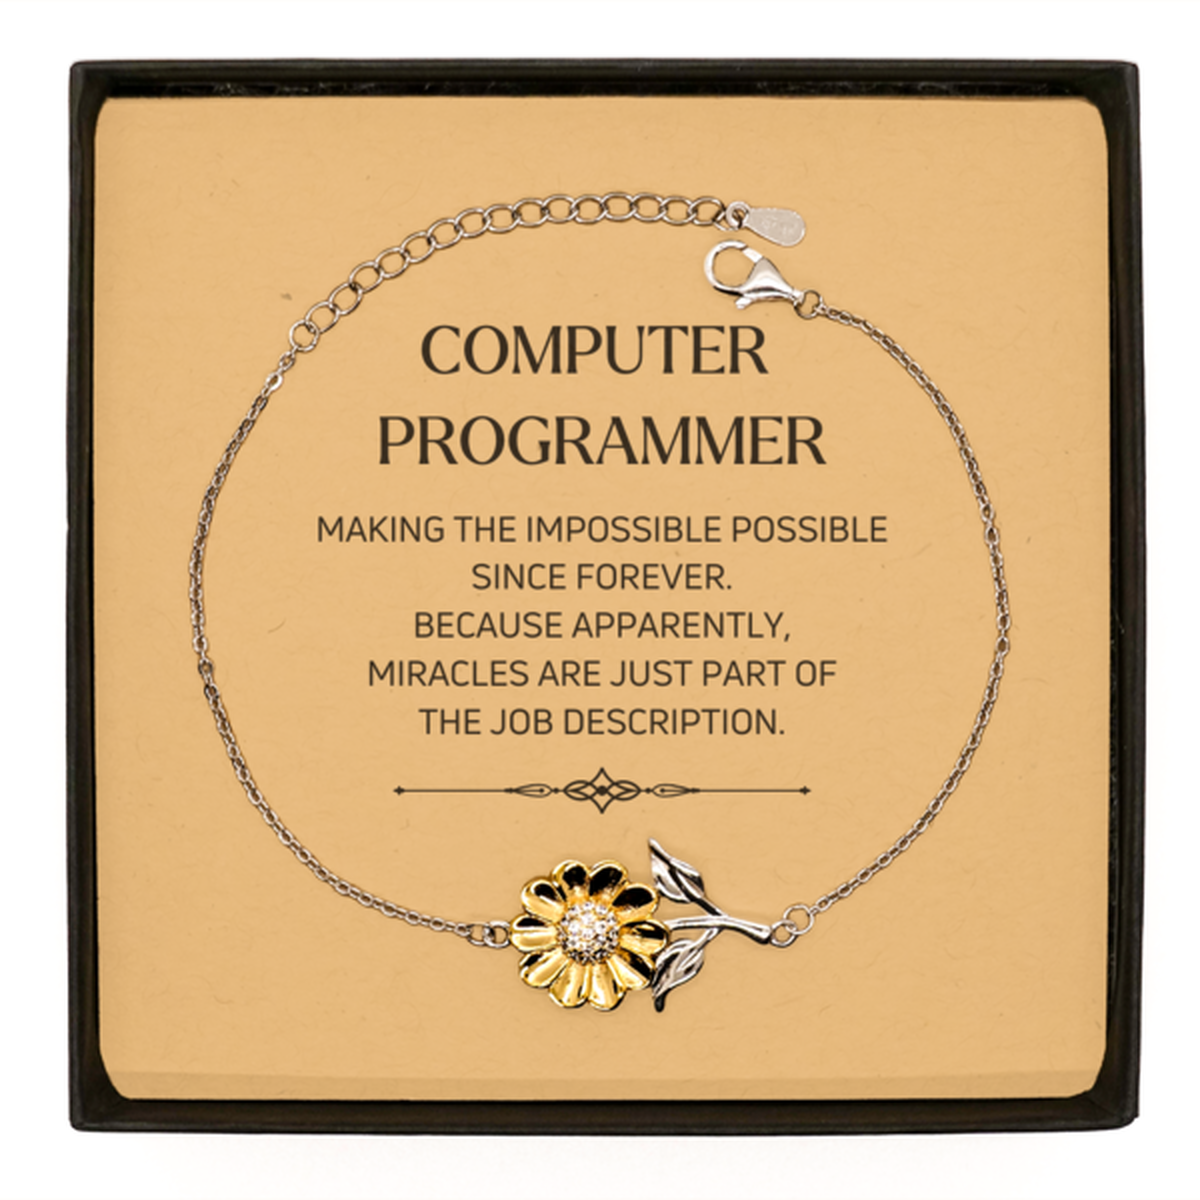 Funny Computer Programmer Gifts, Miracles are just part of the job description, Inspirational Birthday Sunflower Bracelet For Computer Programmer, Men, Women, Coworkers, Friends, Boss